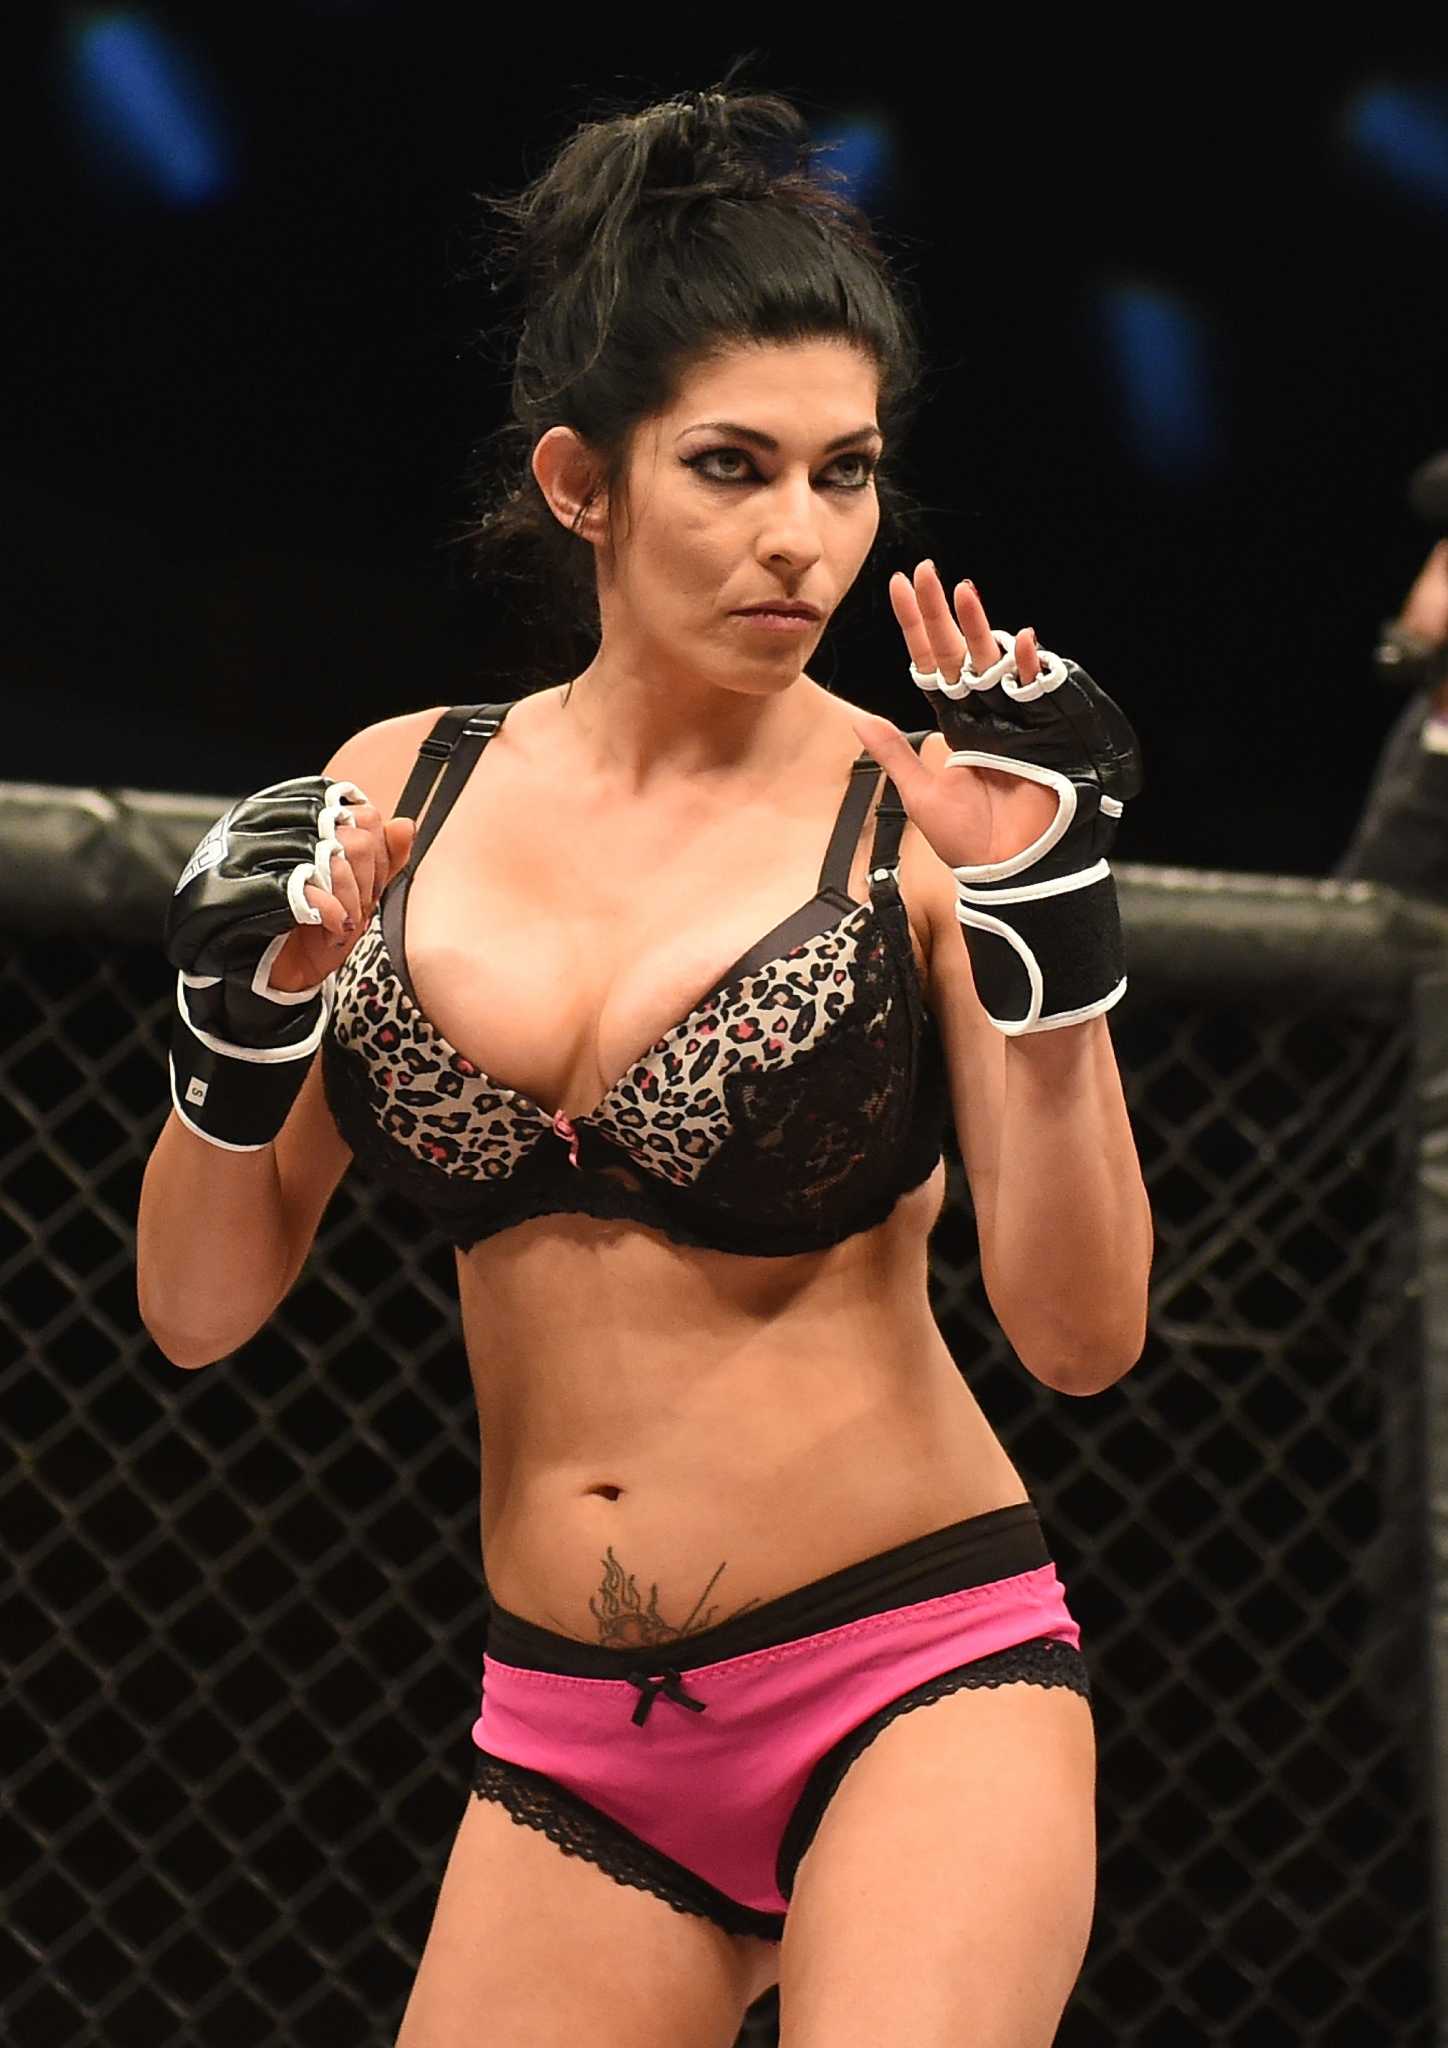 Heavy Breasts Determine Fighting Weight for MMA Fighter